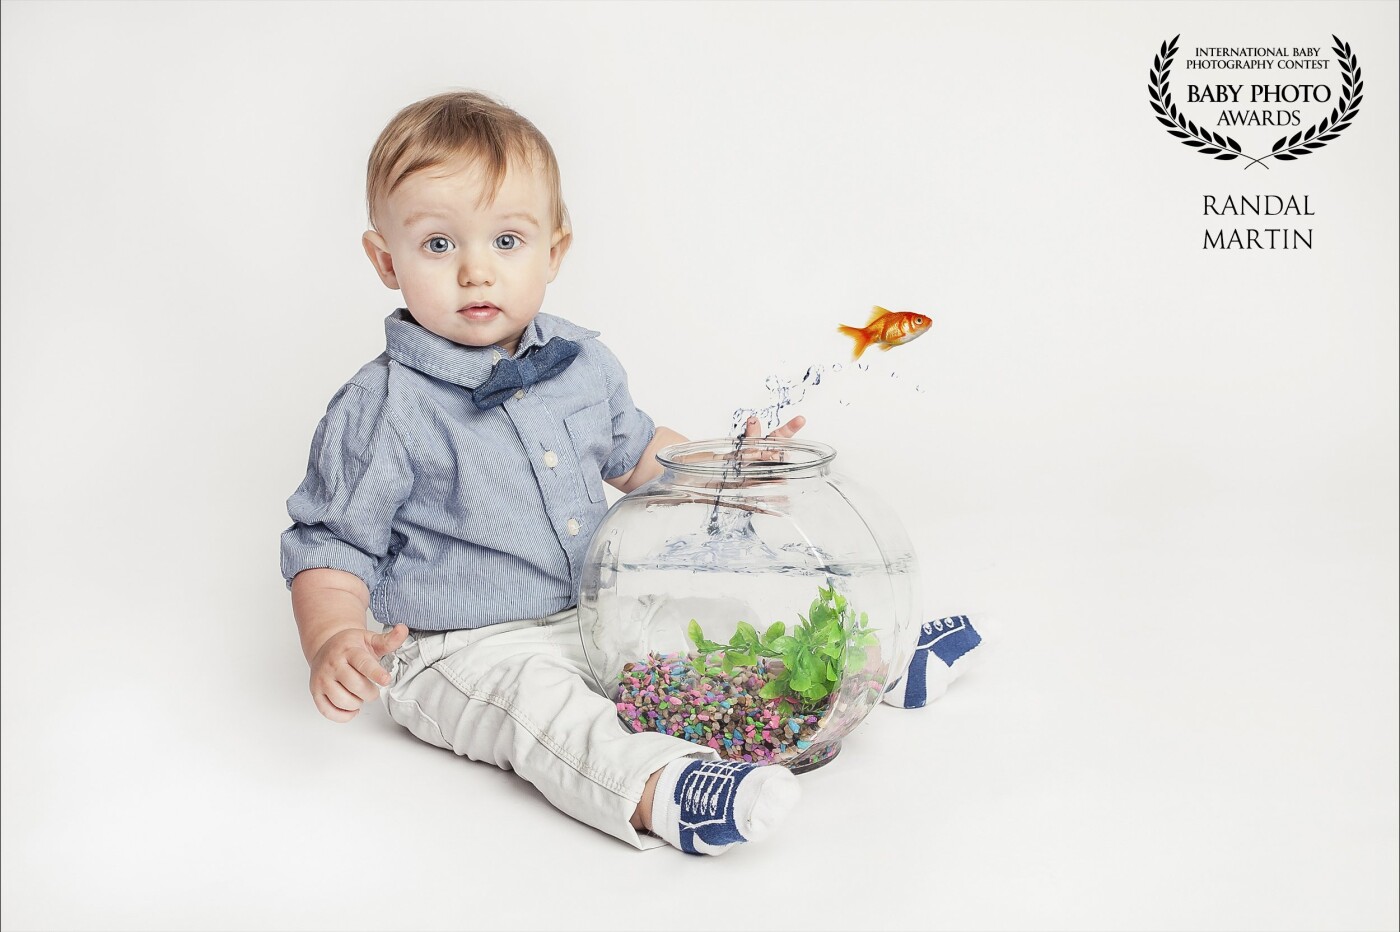 Photo was taken for his 1 year birthday. The family loves fishing and so they wanted to incorporate a fish in the photo. Knowing how hard it is to try and find a trained gold fish, I decided to photoshop one in for the family. His reaction is just perfect for the shot. 